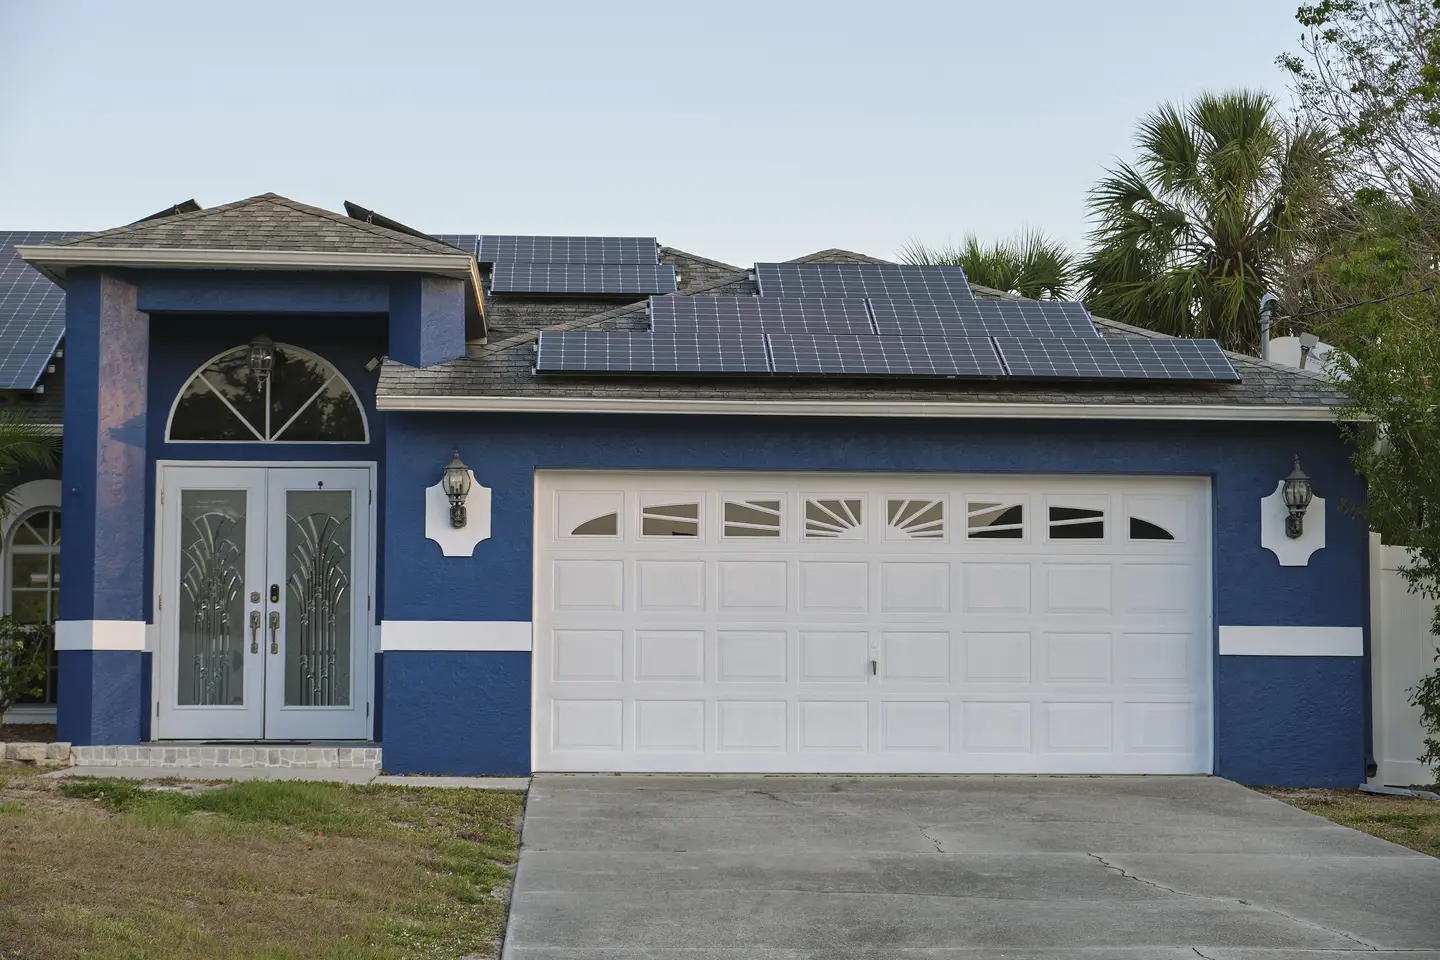 A blue and white home with solar panels on the roof, a double-car garage, and a glass and wood front door